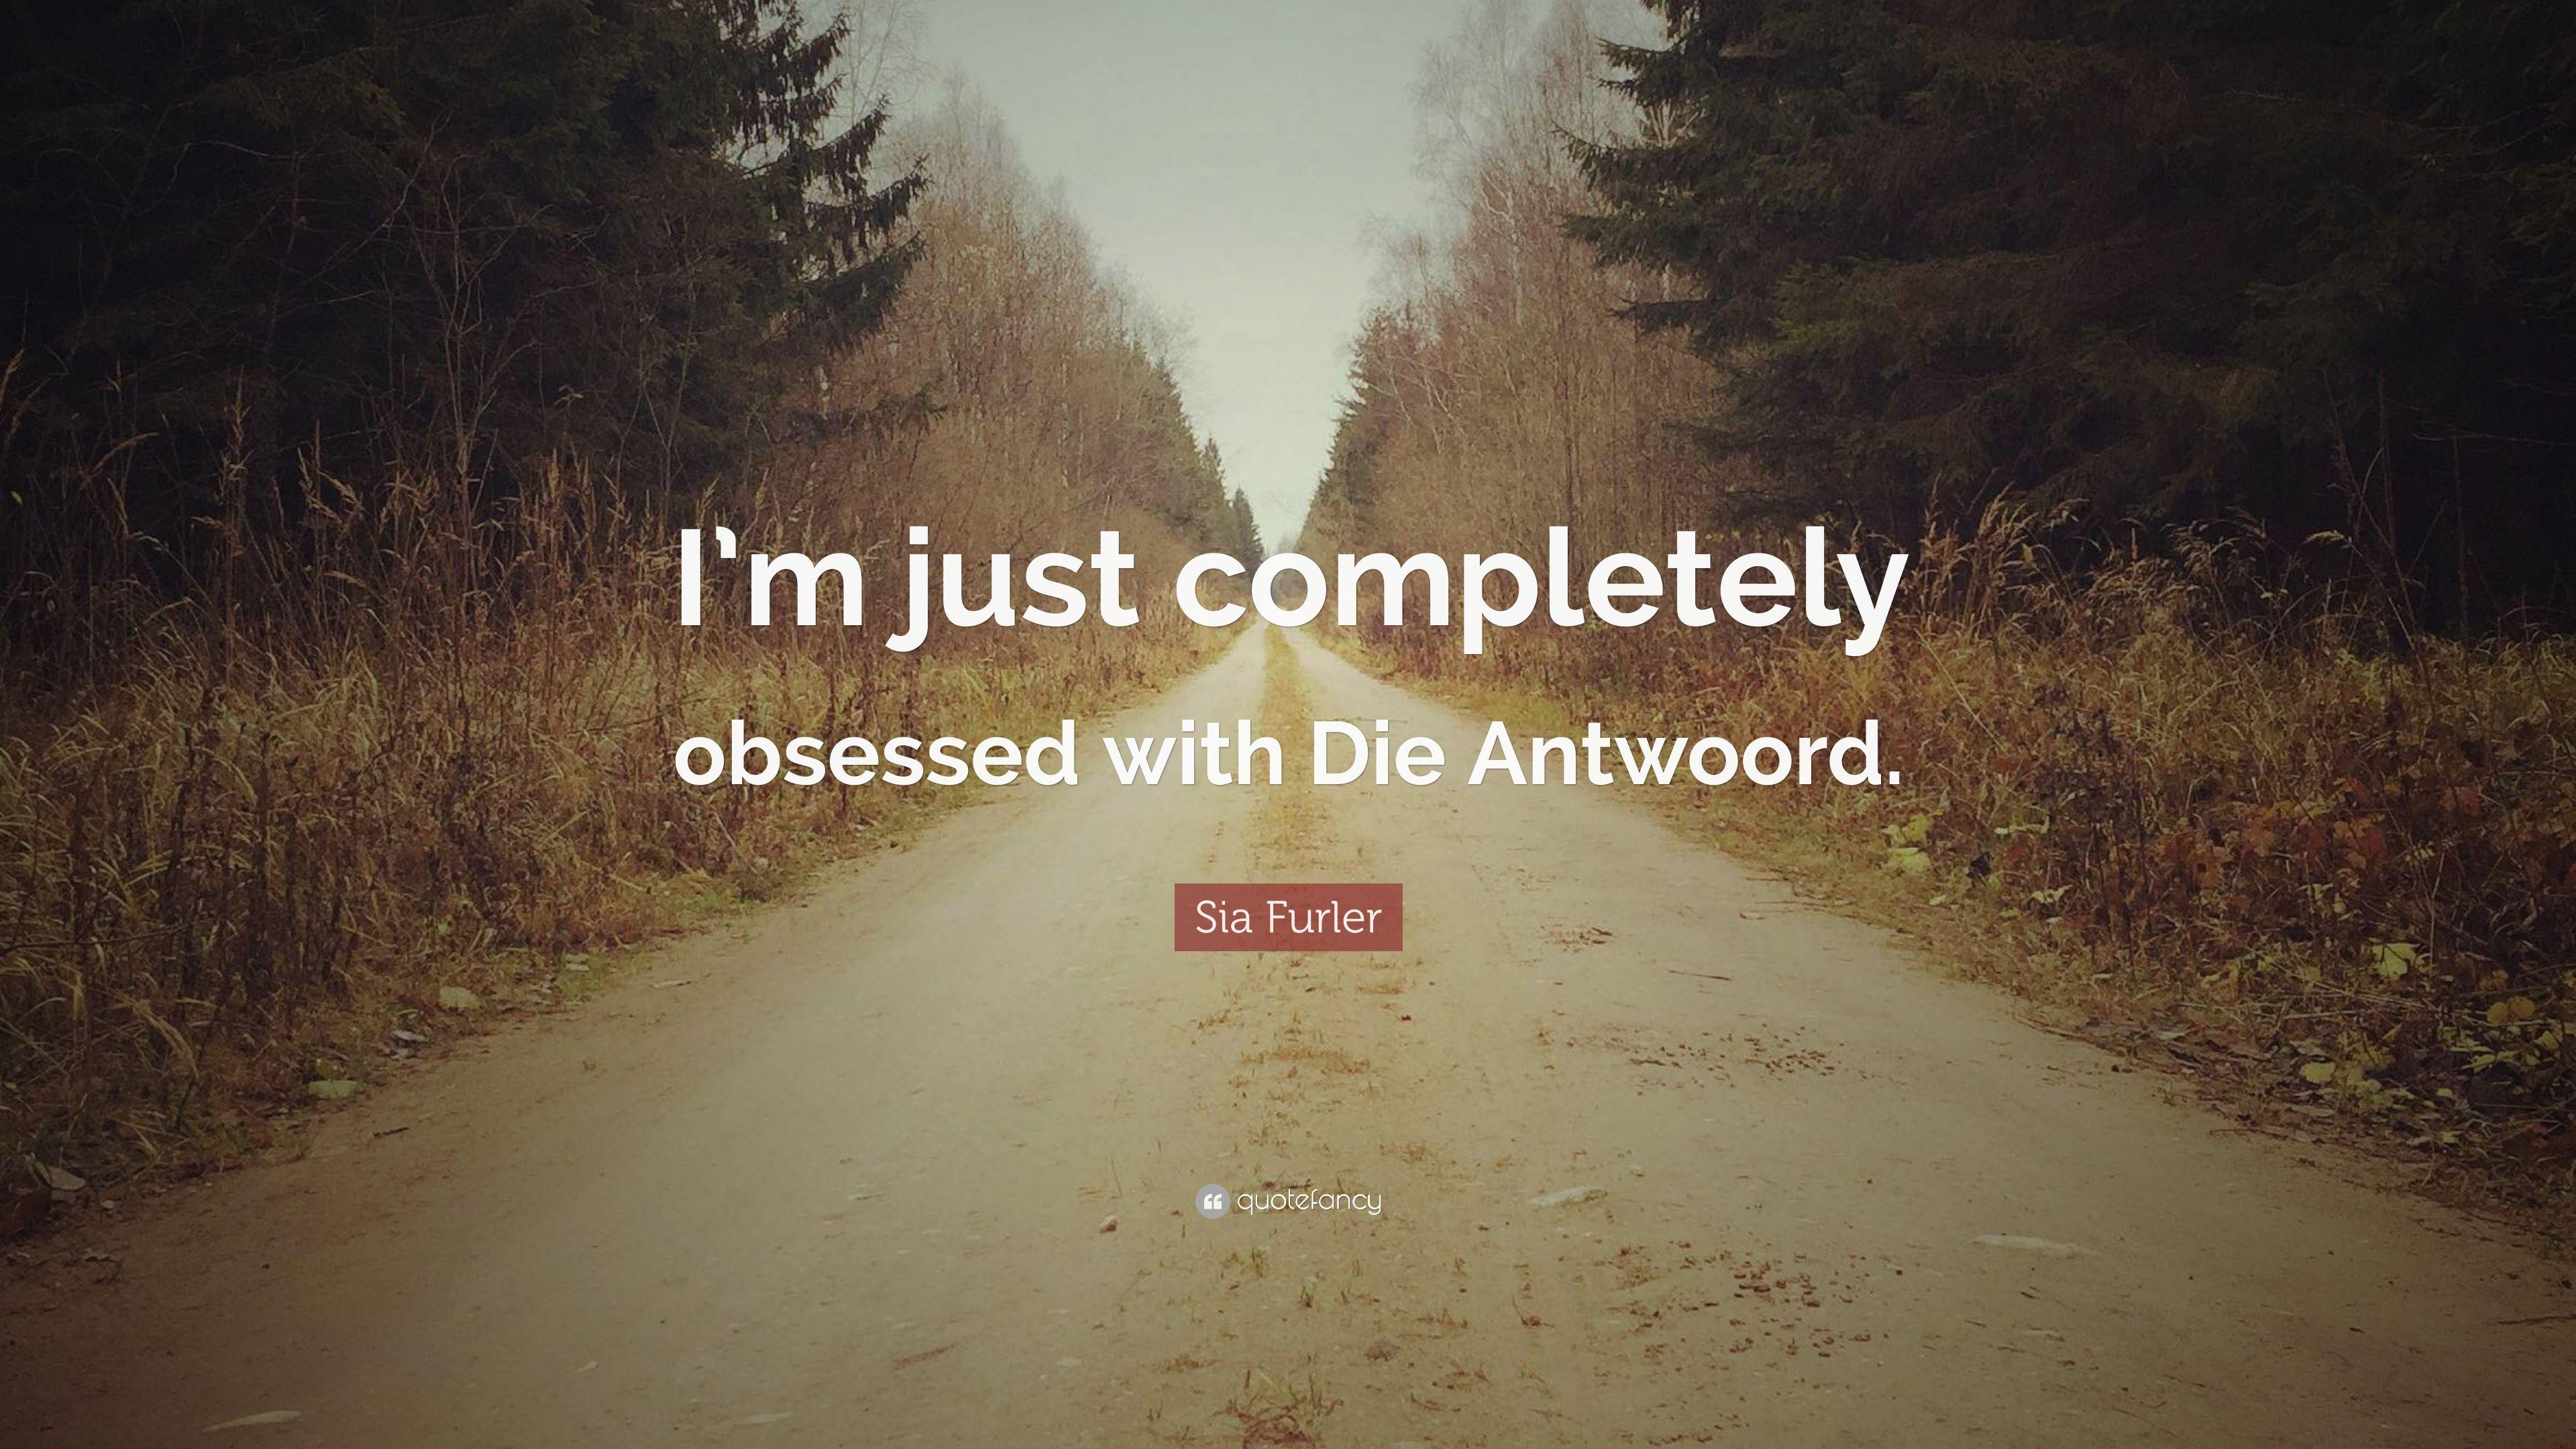 Sia Furler Quote: “I'm just completely obsessed with Die Antwoord